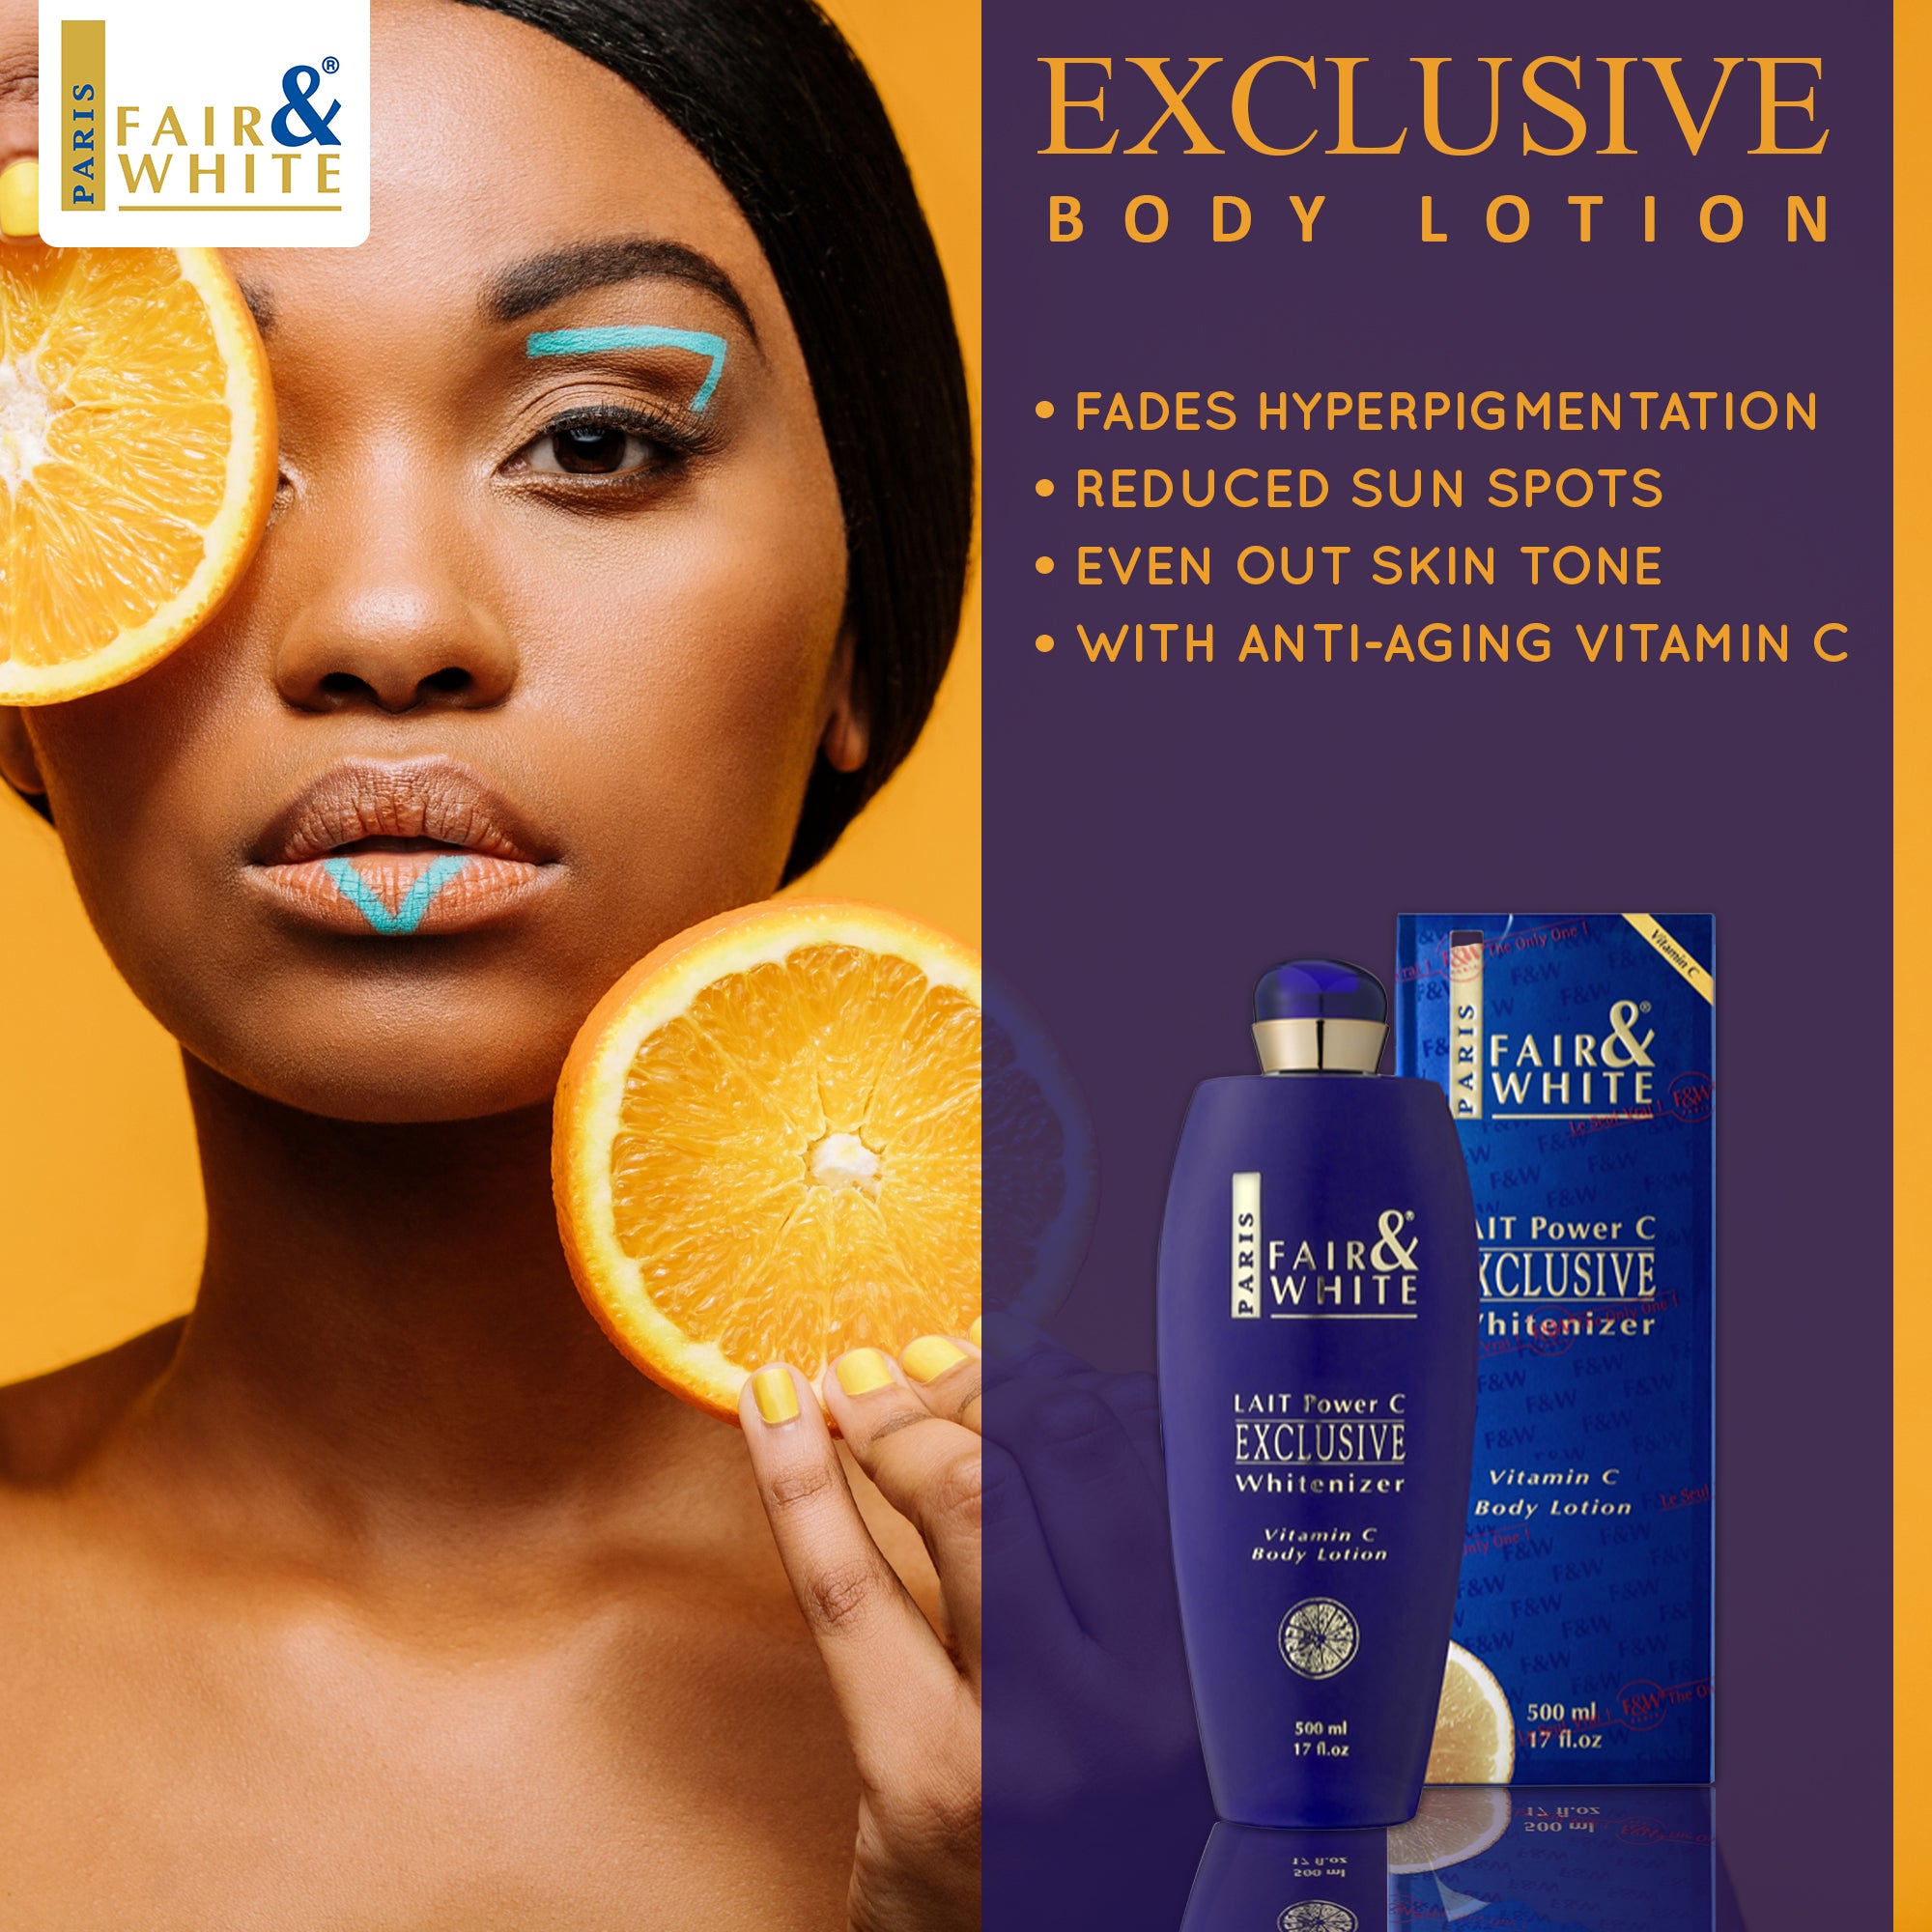 Fair & White Exclusive Body Lotion with Pure Vitamin 